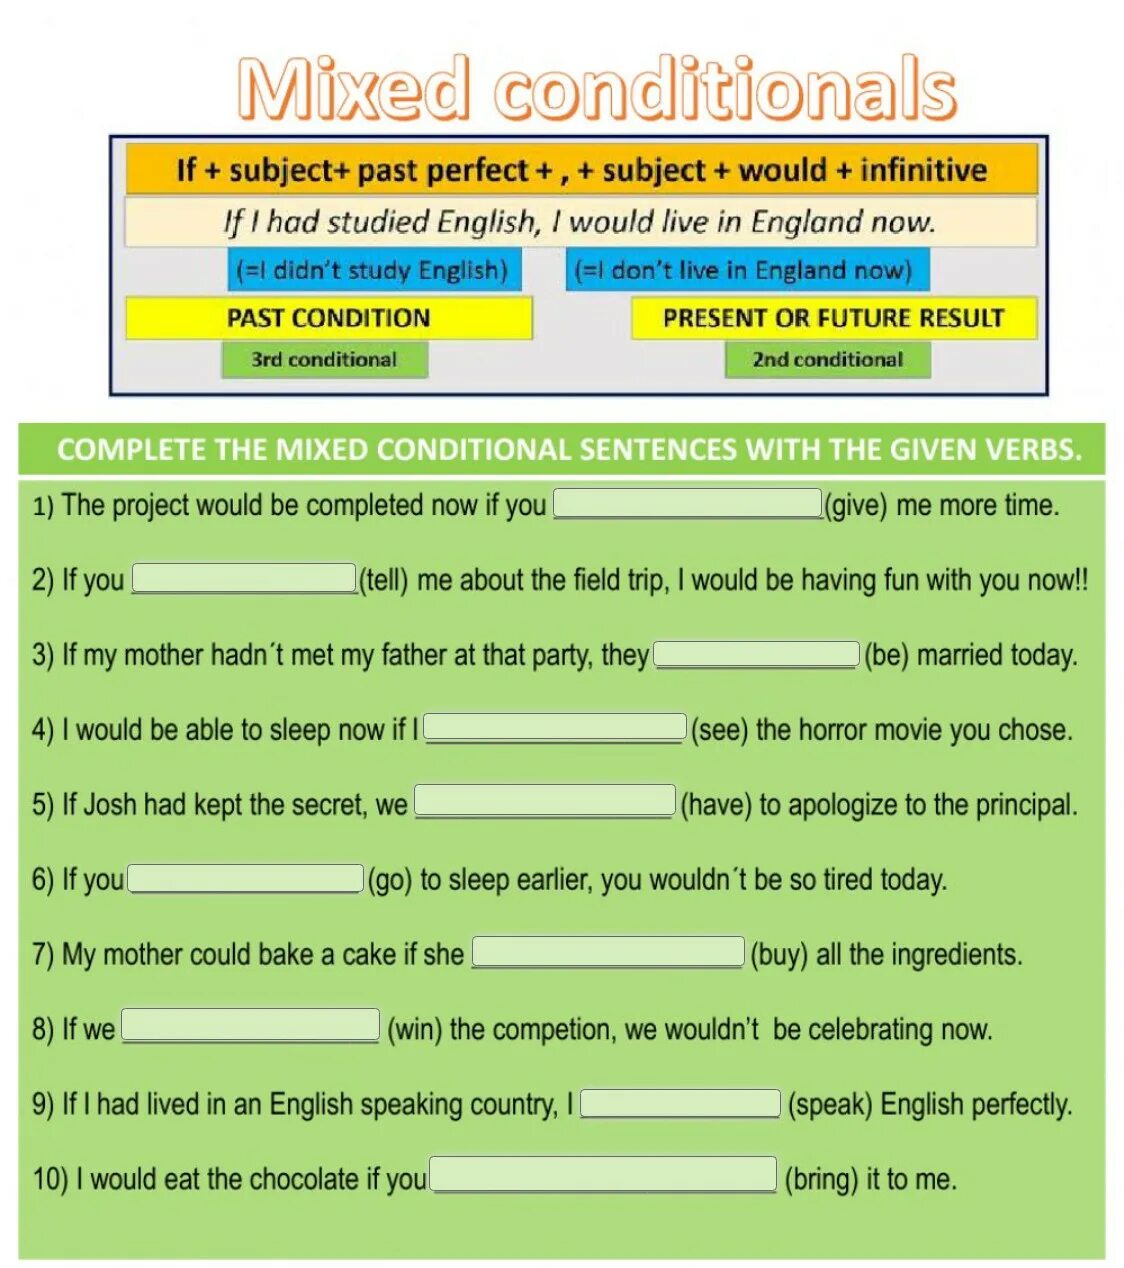 Mixed 2 conditional. Conditionals упражнения. Mixed conditionals в английском Worksheets. Условные предложения Worksheets. Conditional sentences микс.